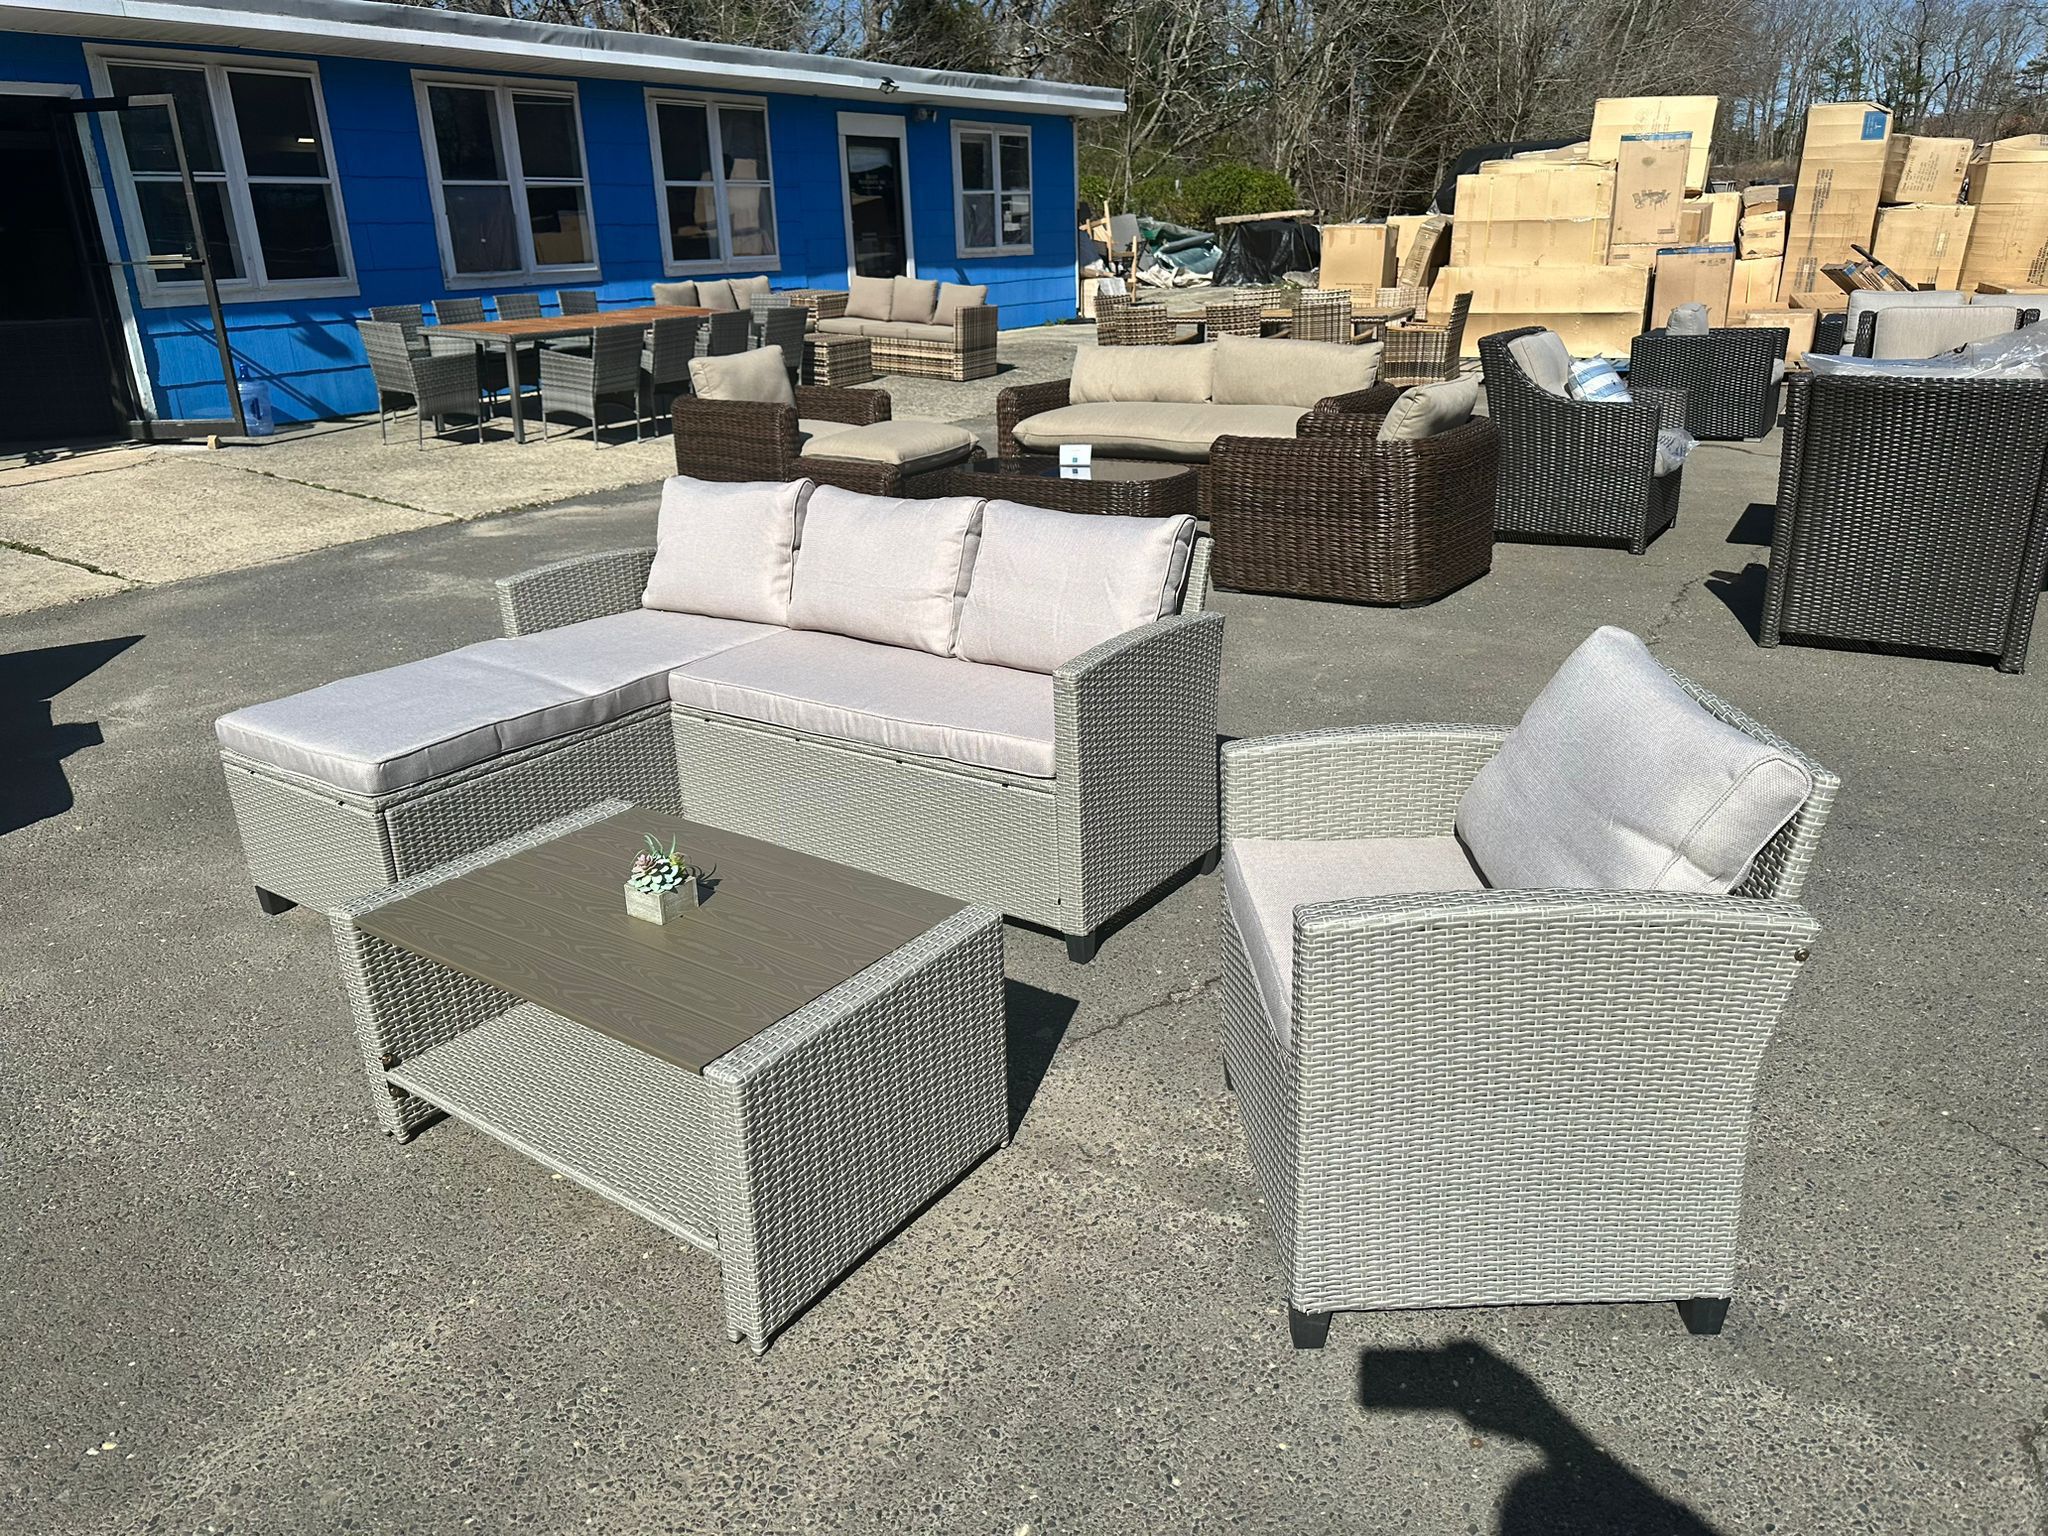 FREE DELIVERY AND INSTALLATION - Sectional Patio Outdoor Furniture (Including Chair and Table)